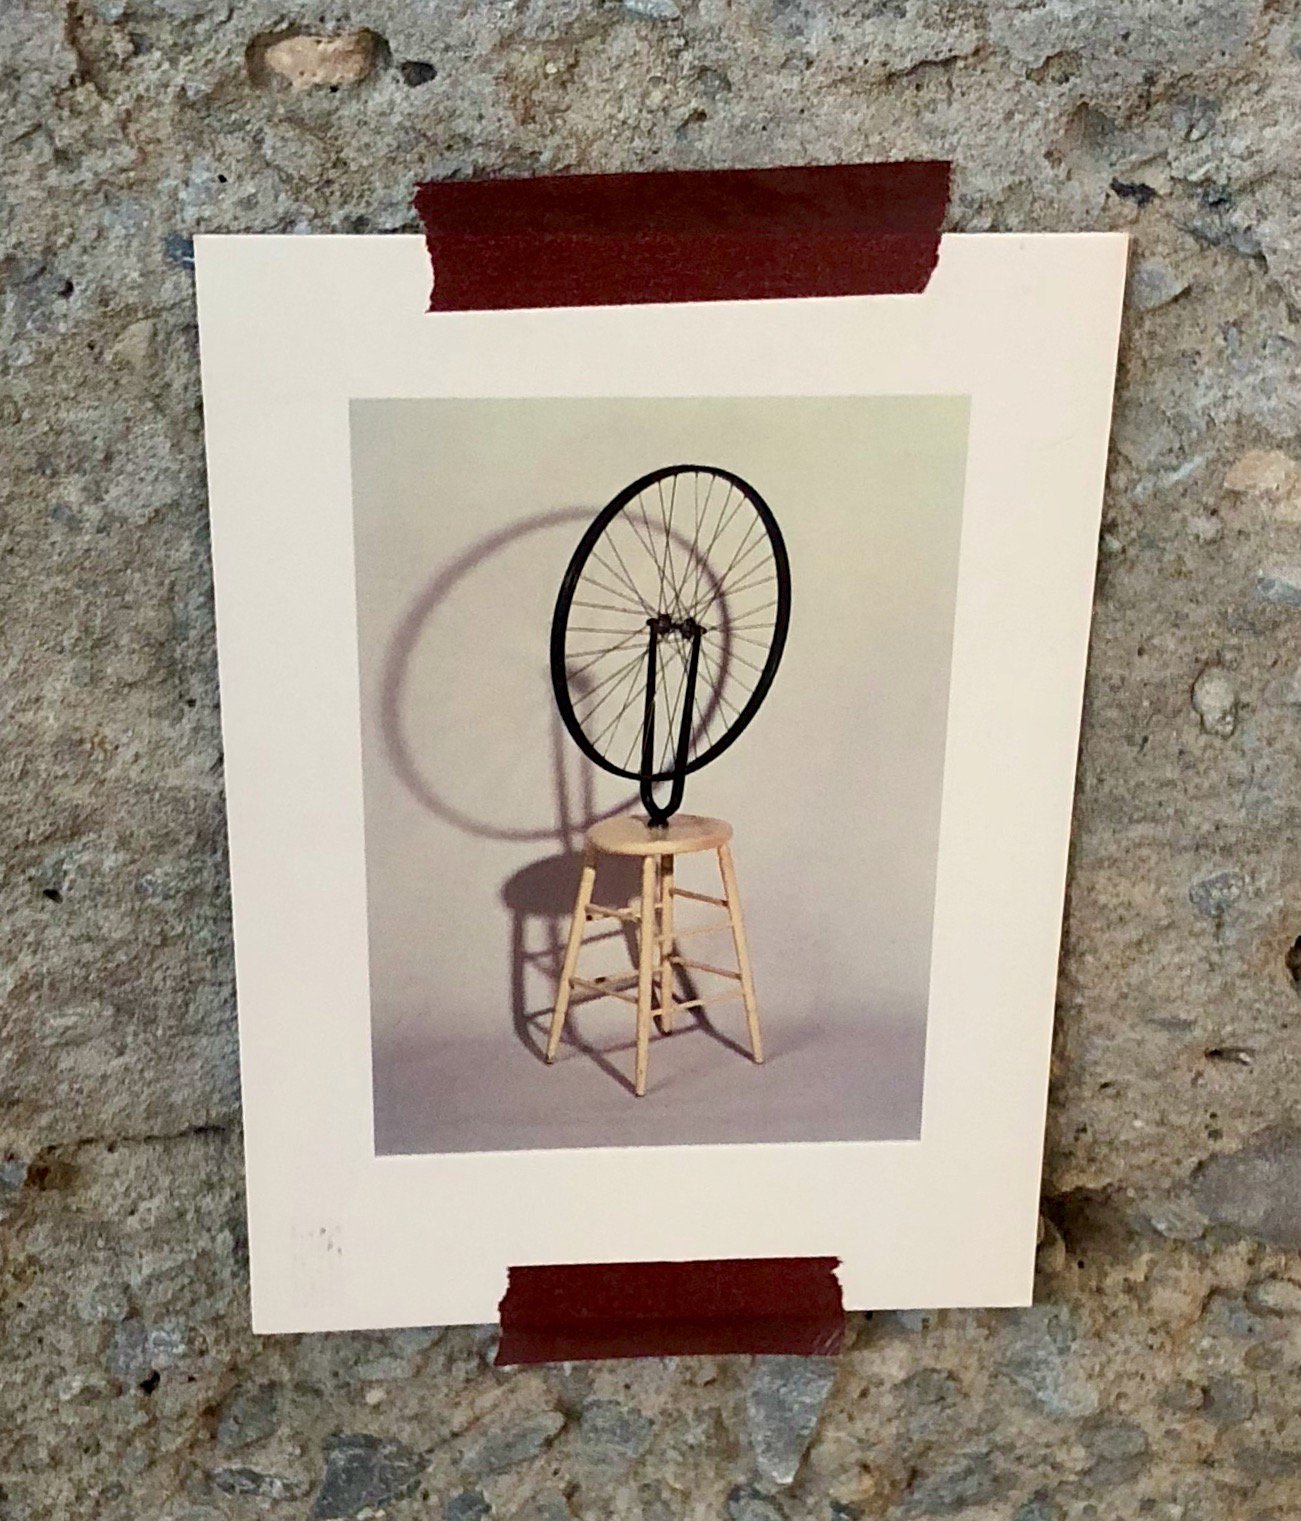 Image of postcard delivered by Sarah Cannon to Notion&#x27;s office. The postcard, of Marcel Duchamp&#x27;s &#x27;Bicycle Wheel Sculpture&#x27; is reportedly hanging in their office...